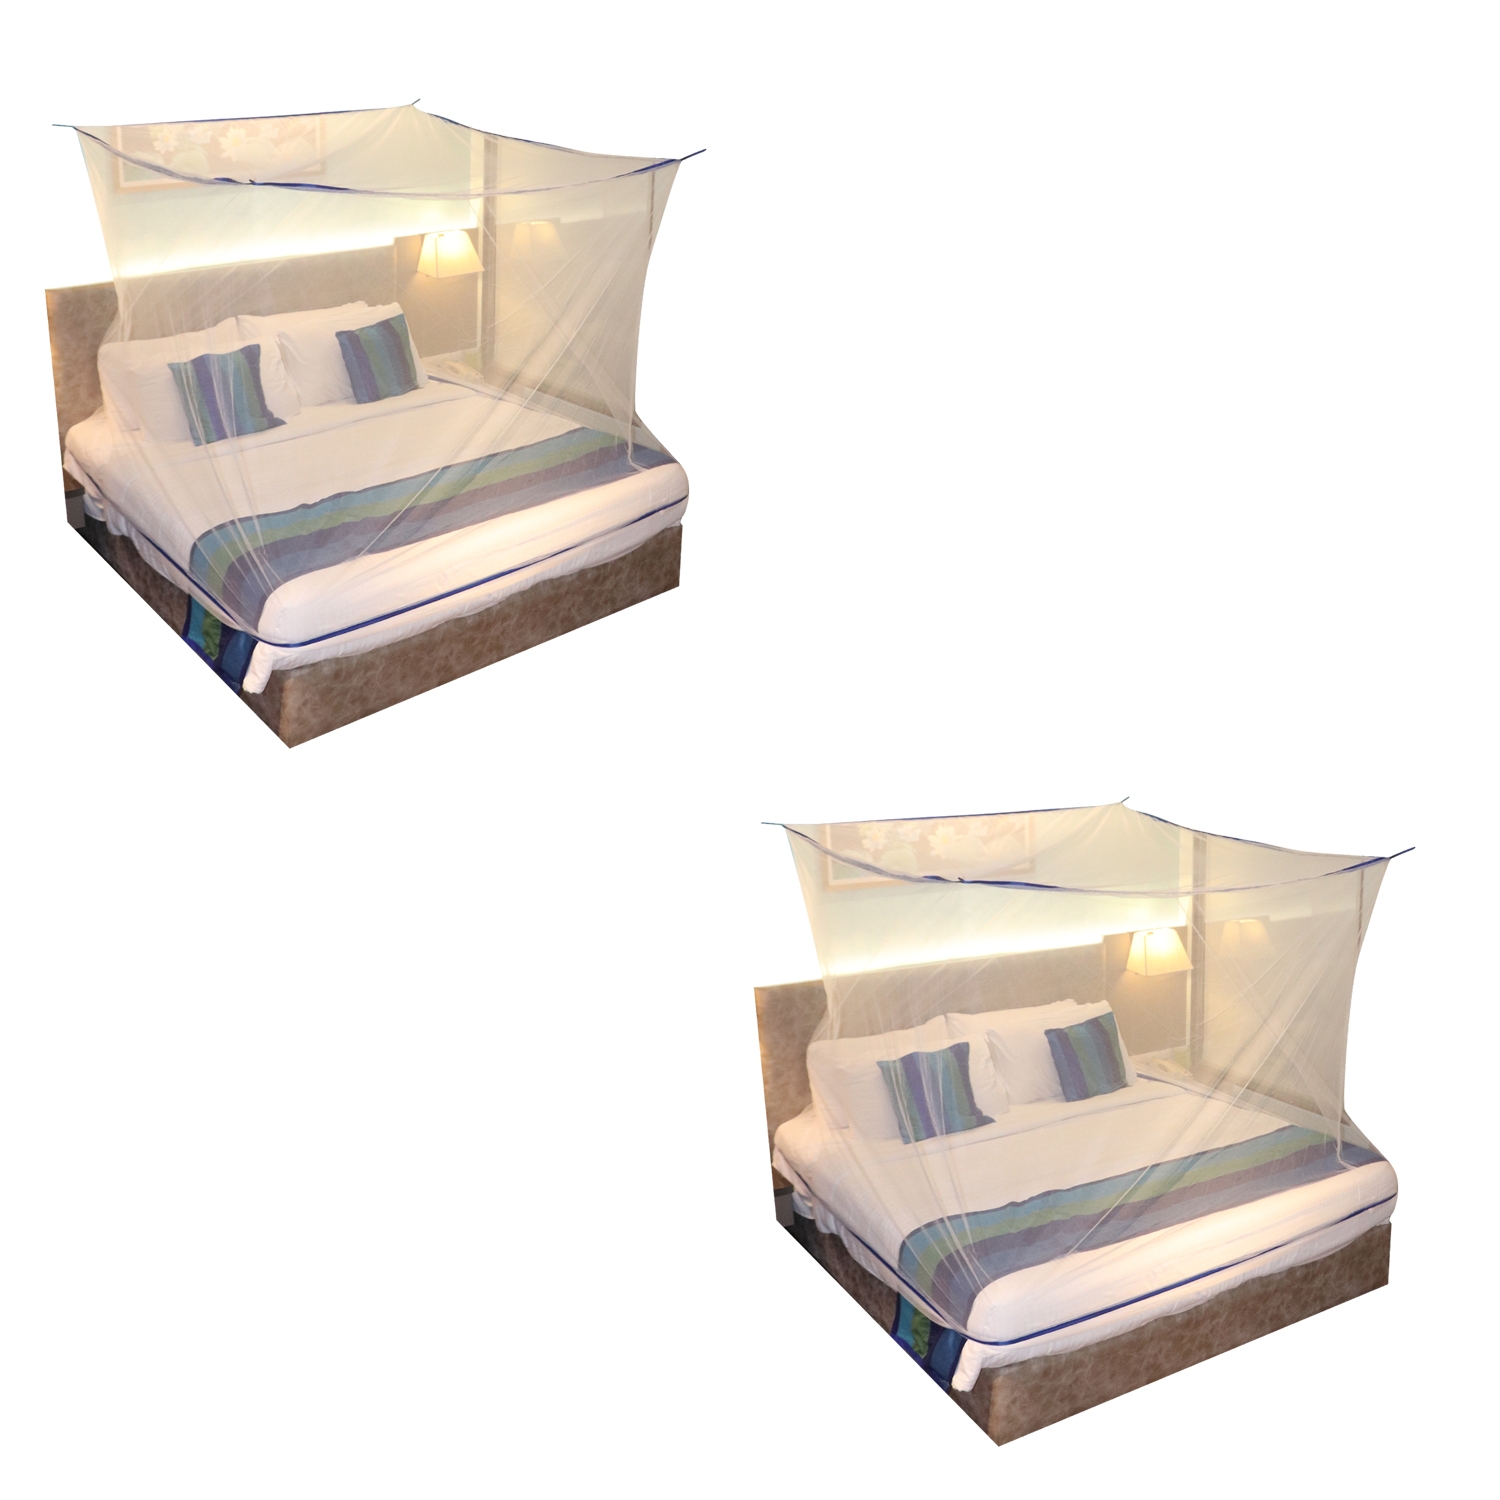 SILVER SHINE | Mosquito Net for Double Bed, King-Size, Square Hanging Foldable Polyester Net White And BluePack of 2 3